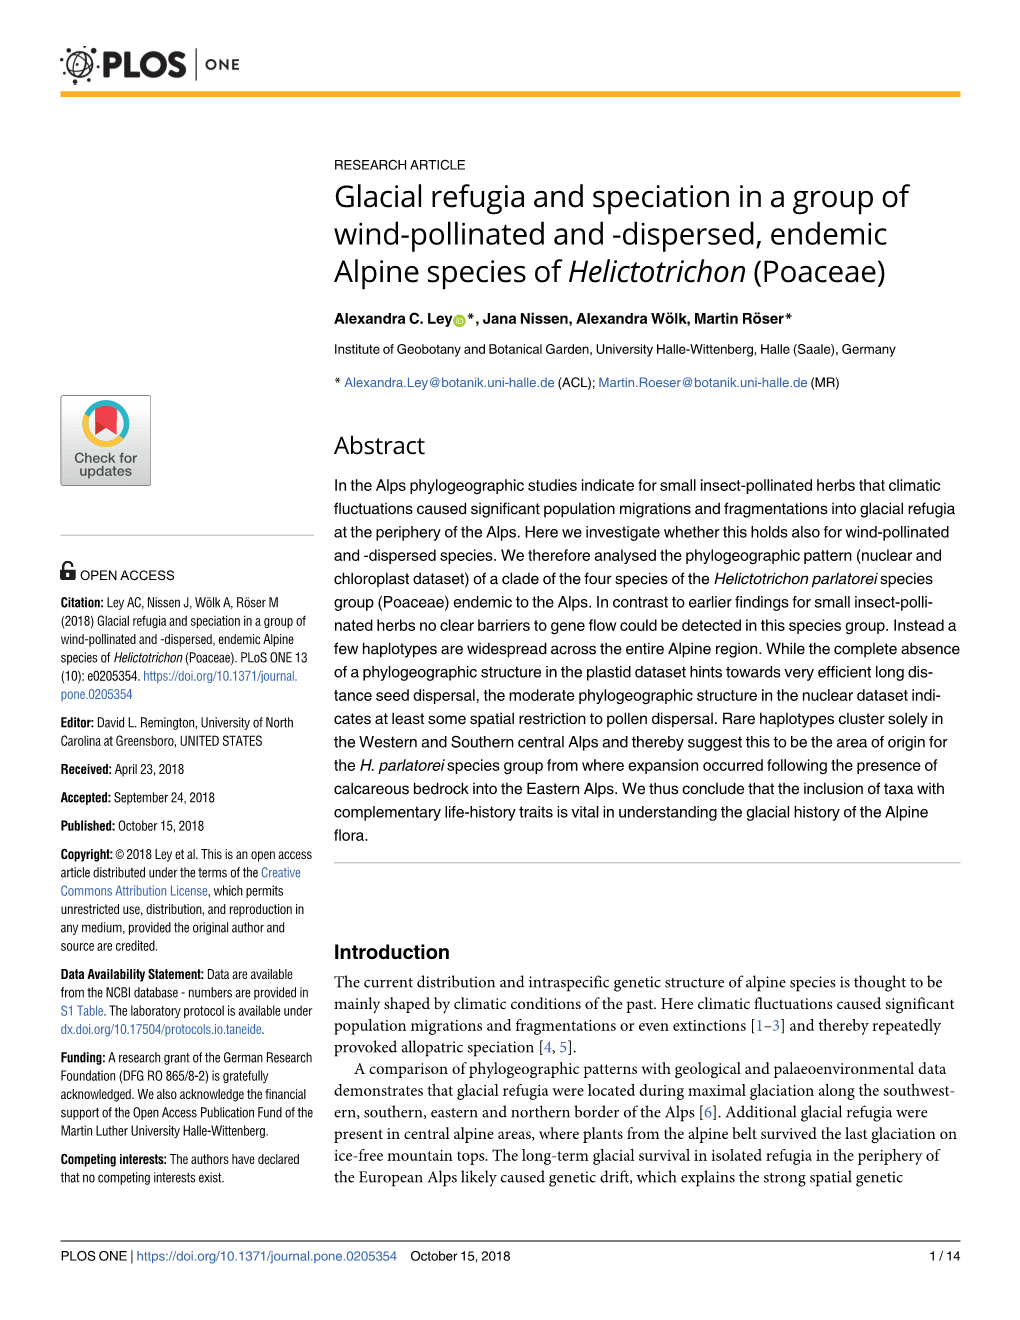 Glacial Refugia and Speciation in a Group of Wind-Pollinated and -Dispersed, Endemic Alpine Species of Helictotrichon (Poaceae)